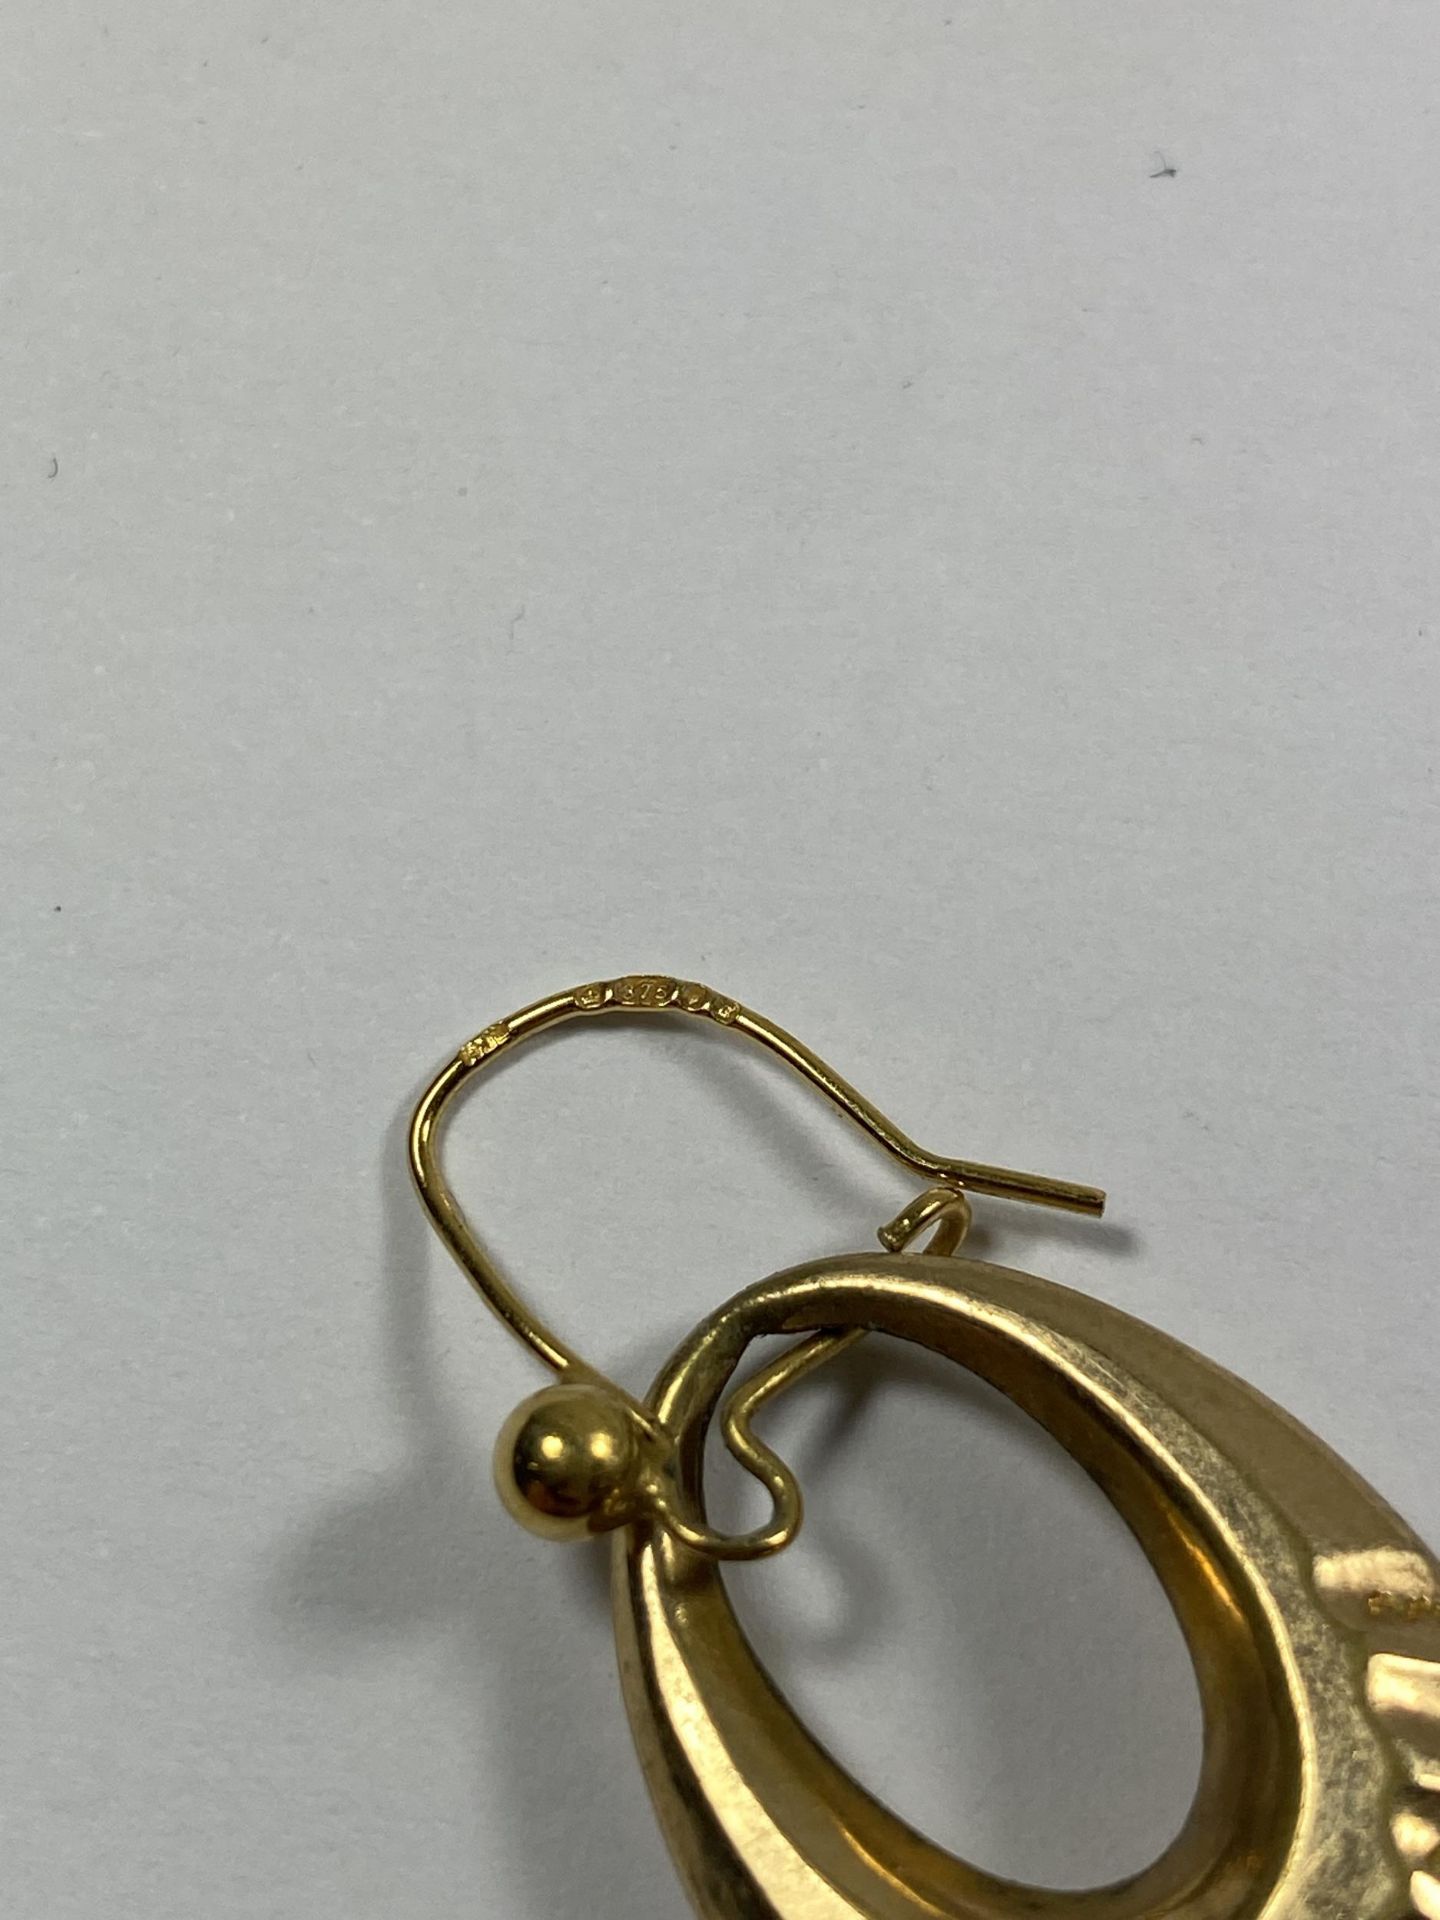 TWO PAIRS OF VINTAGE 9CT YELLOW GOLD EARRINGS, TOTAL WEIGHT 4.99G - Image 3 of 3